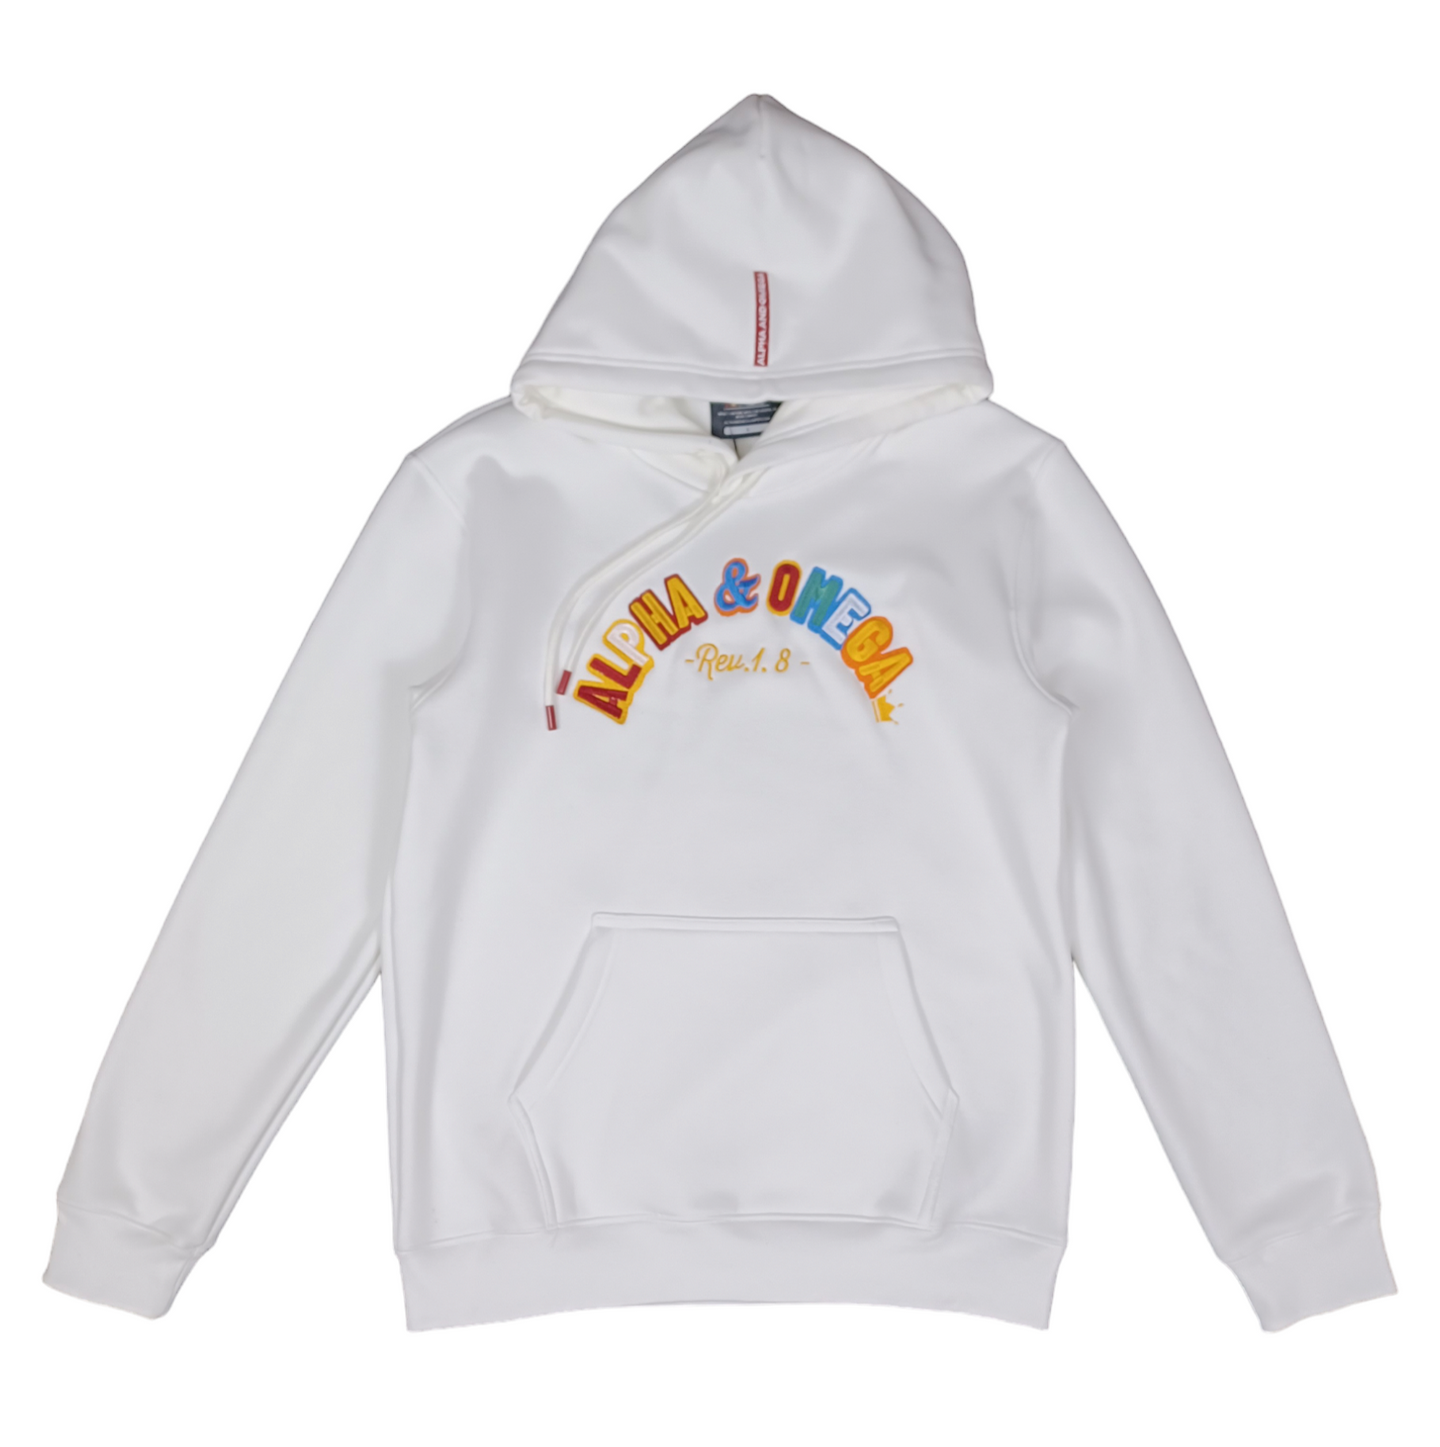 ALPHA AND OMEGA REV. 1. 8, Embroidered Hoodie (White)